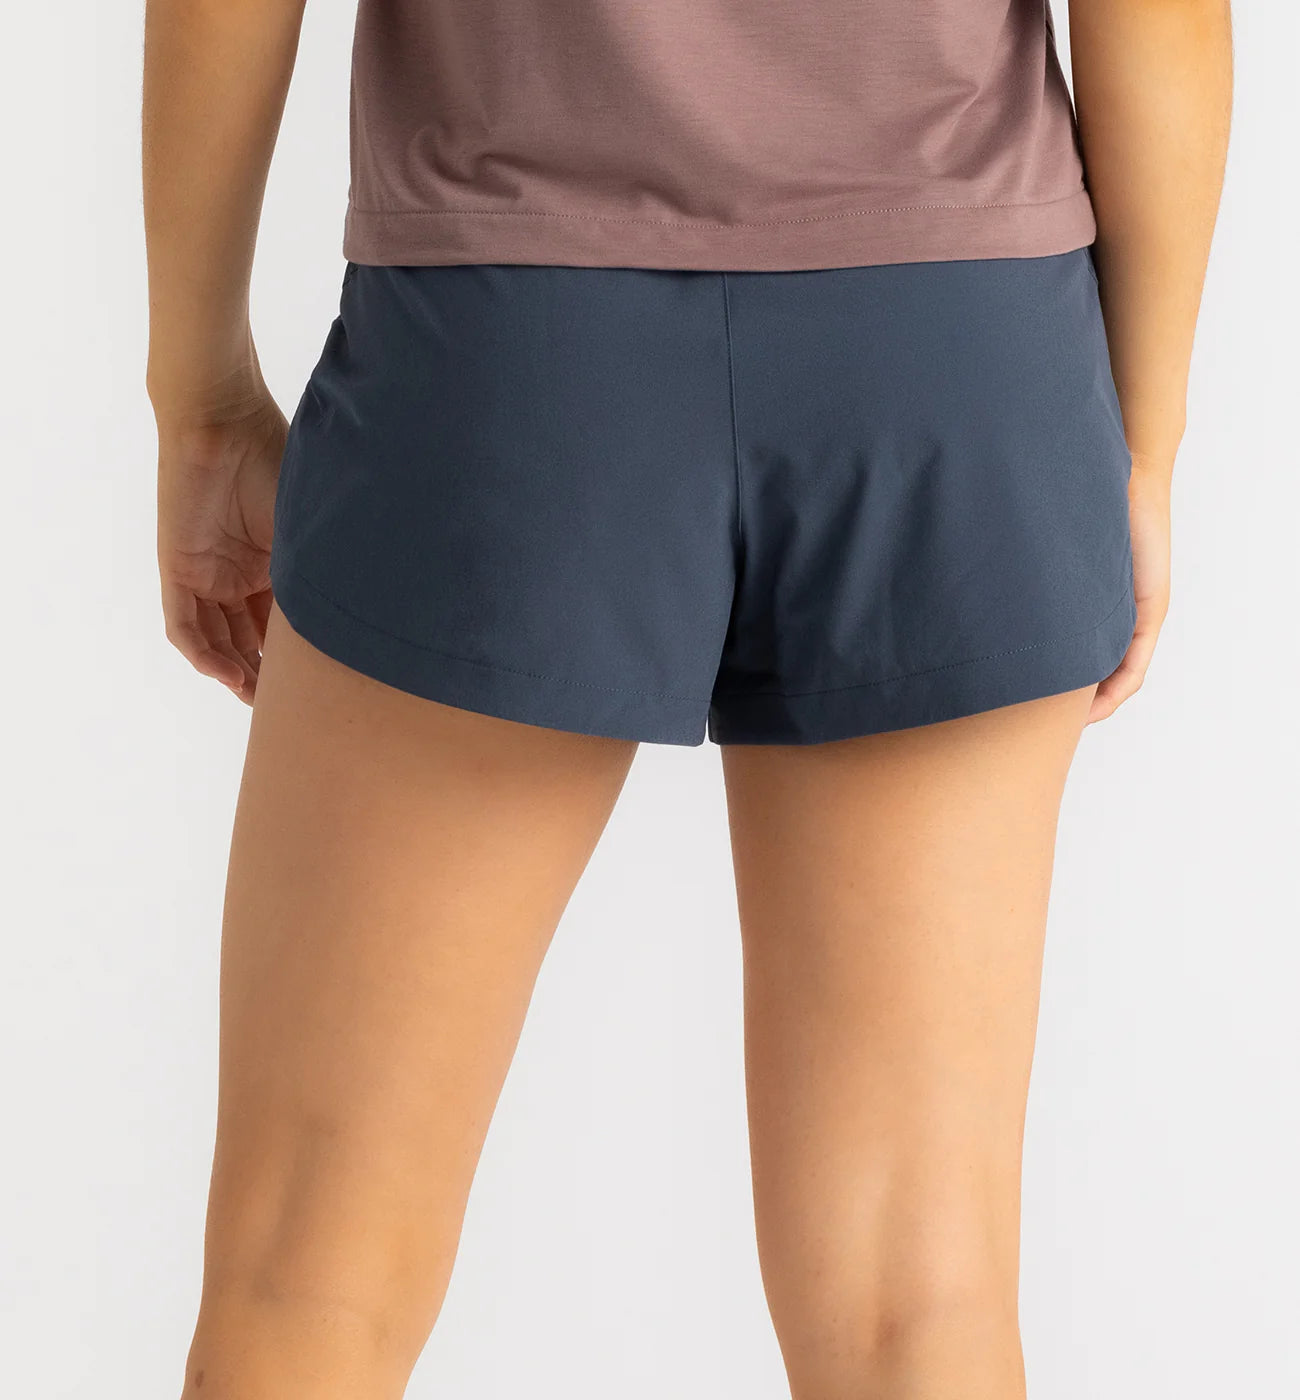 Free Fly Women's Bamboo-Lined Active Breeze Short | 3" | Blue Dusk II